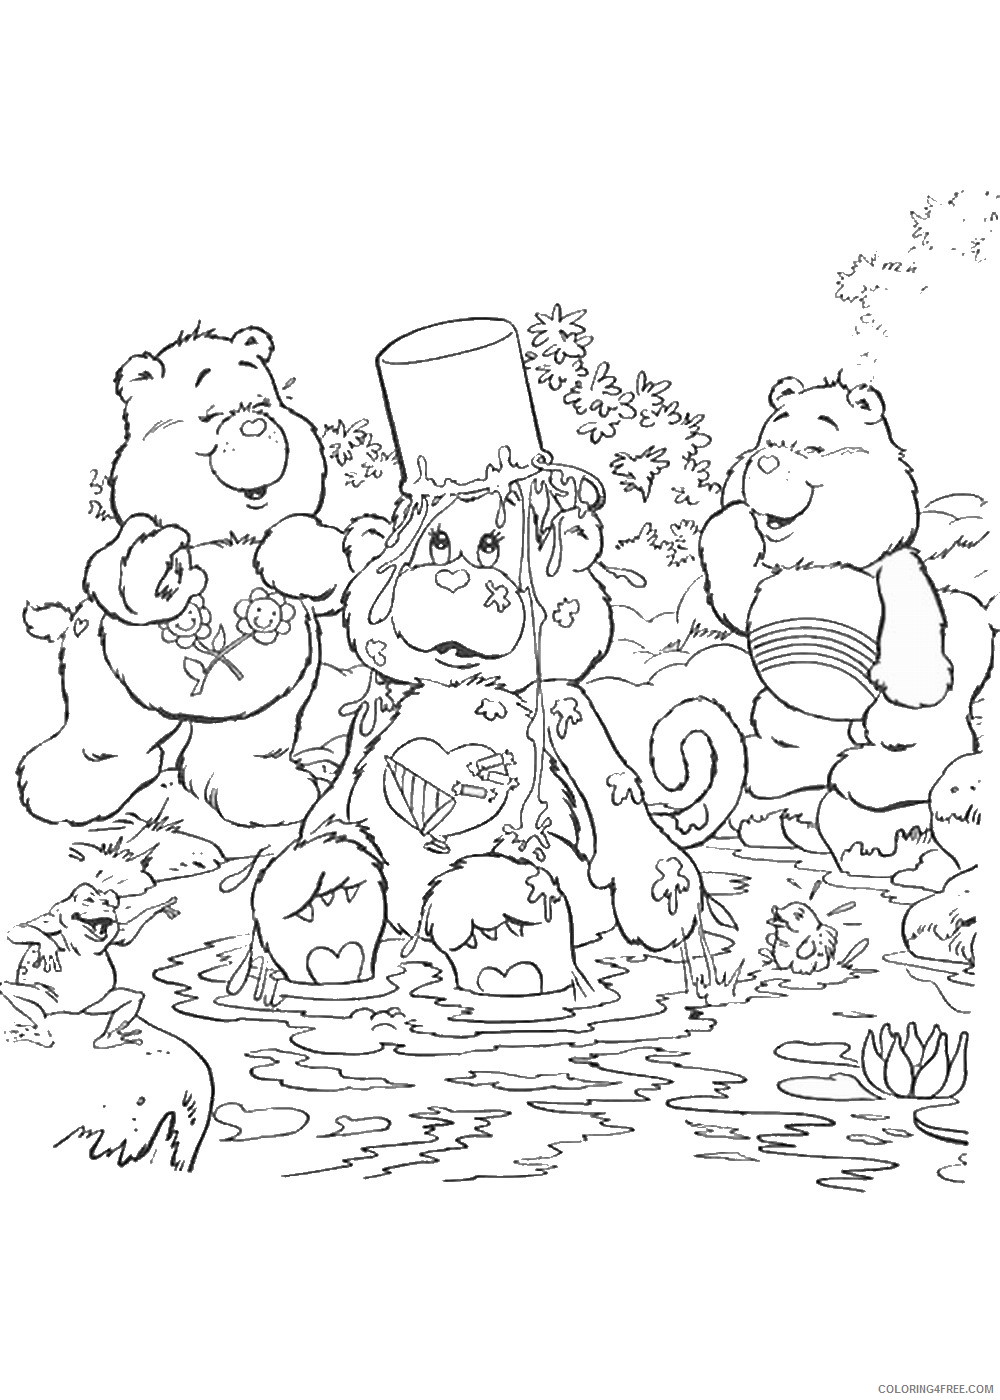 Care Bears Coloring Pages Cartoons care_bears_cl_34 Printable 2020 1569 Coloring4free